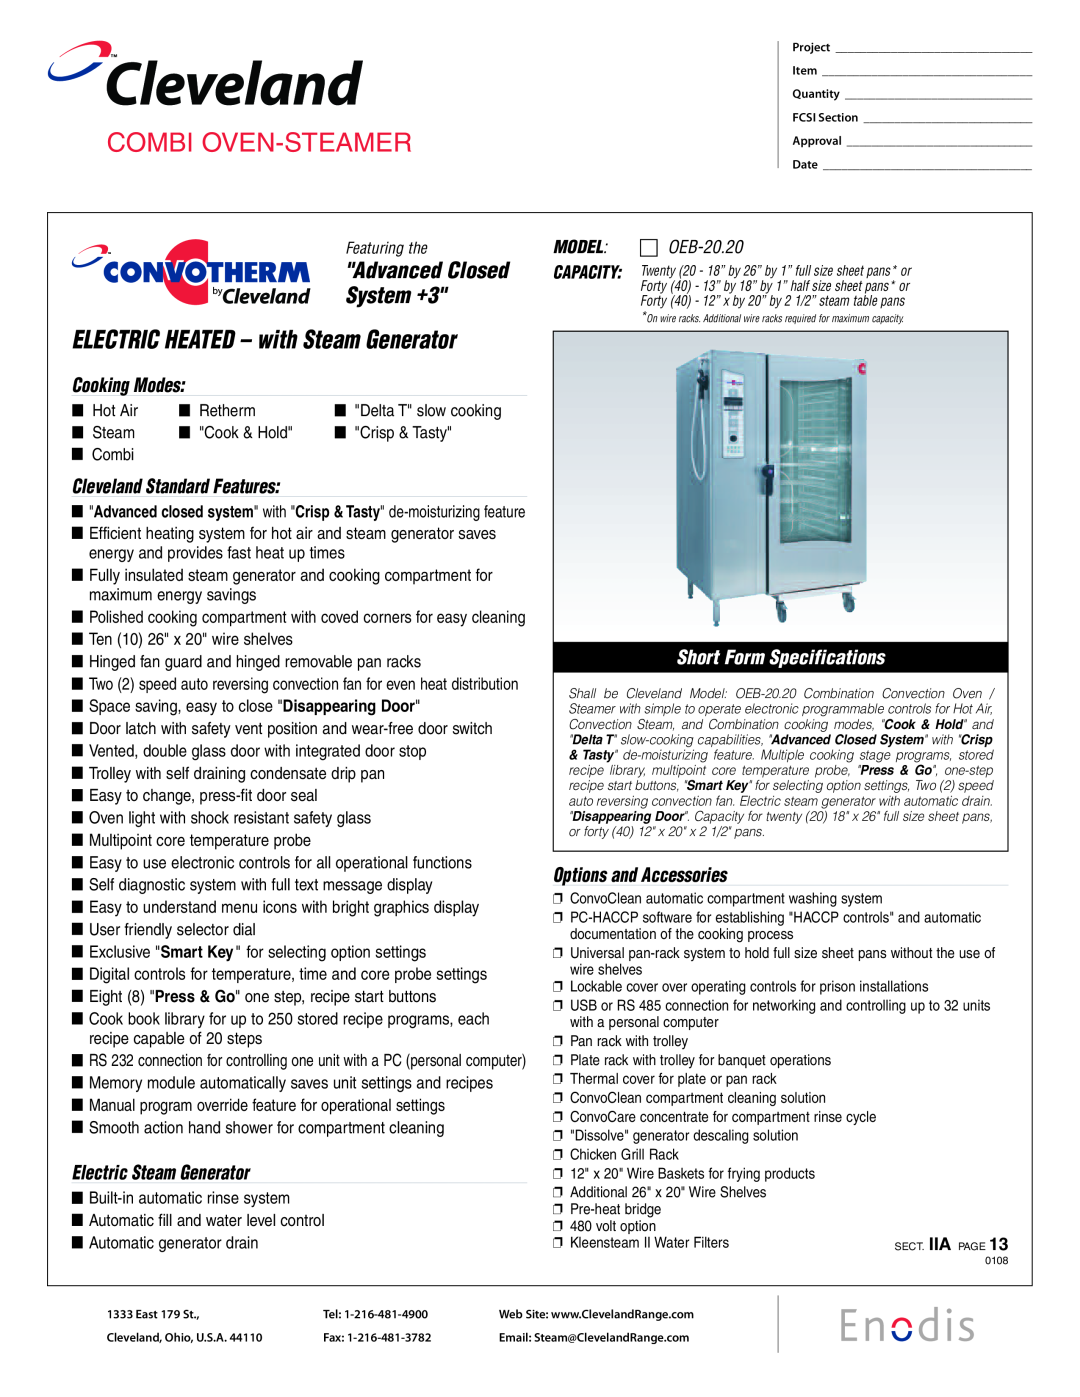 Cleveland Range OES-20.20 manual Service & Parts Manual, Convotherm Combination Oven-Steamer, MODELS Electric, Enodis 